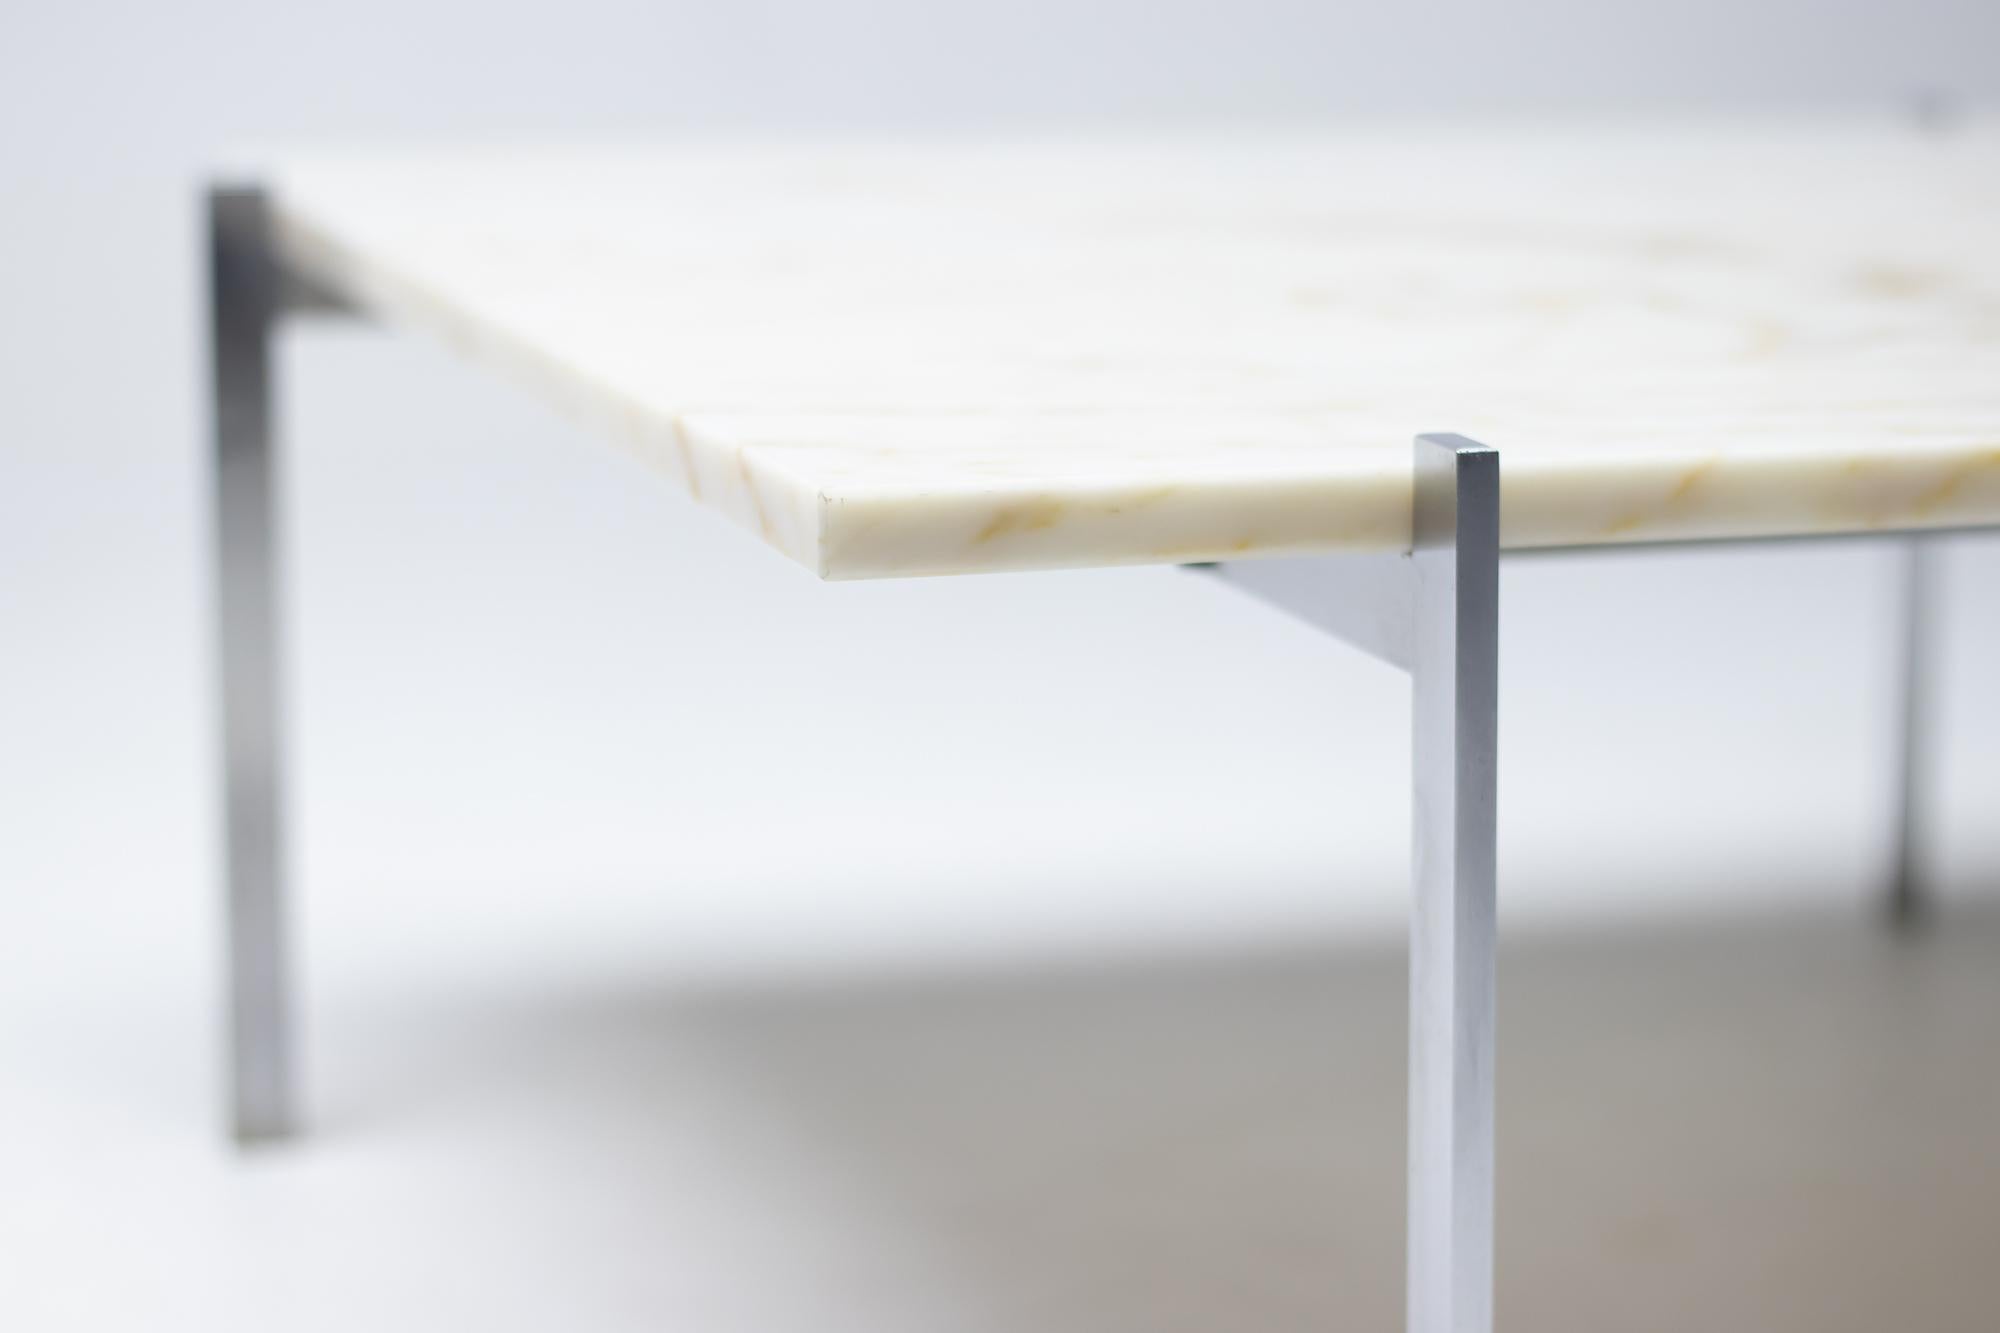 Poul Kjærholm for E. Kold Christensen, white marble and steel, Denmark, designed in 1955. 
Marked with E. Kold Christensen logo in the frame.

This table by Kjærholm is the epitome of minimalistic yet monumental design. The 'swastika' shaped